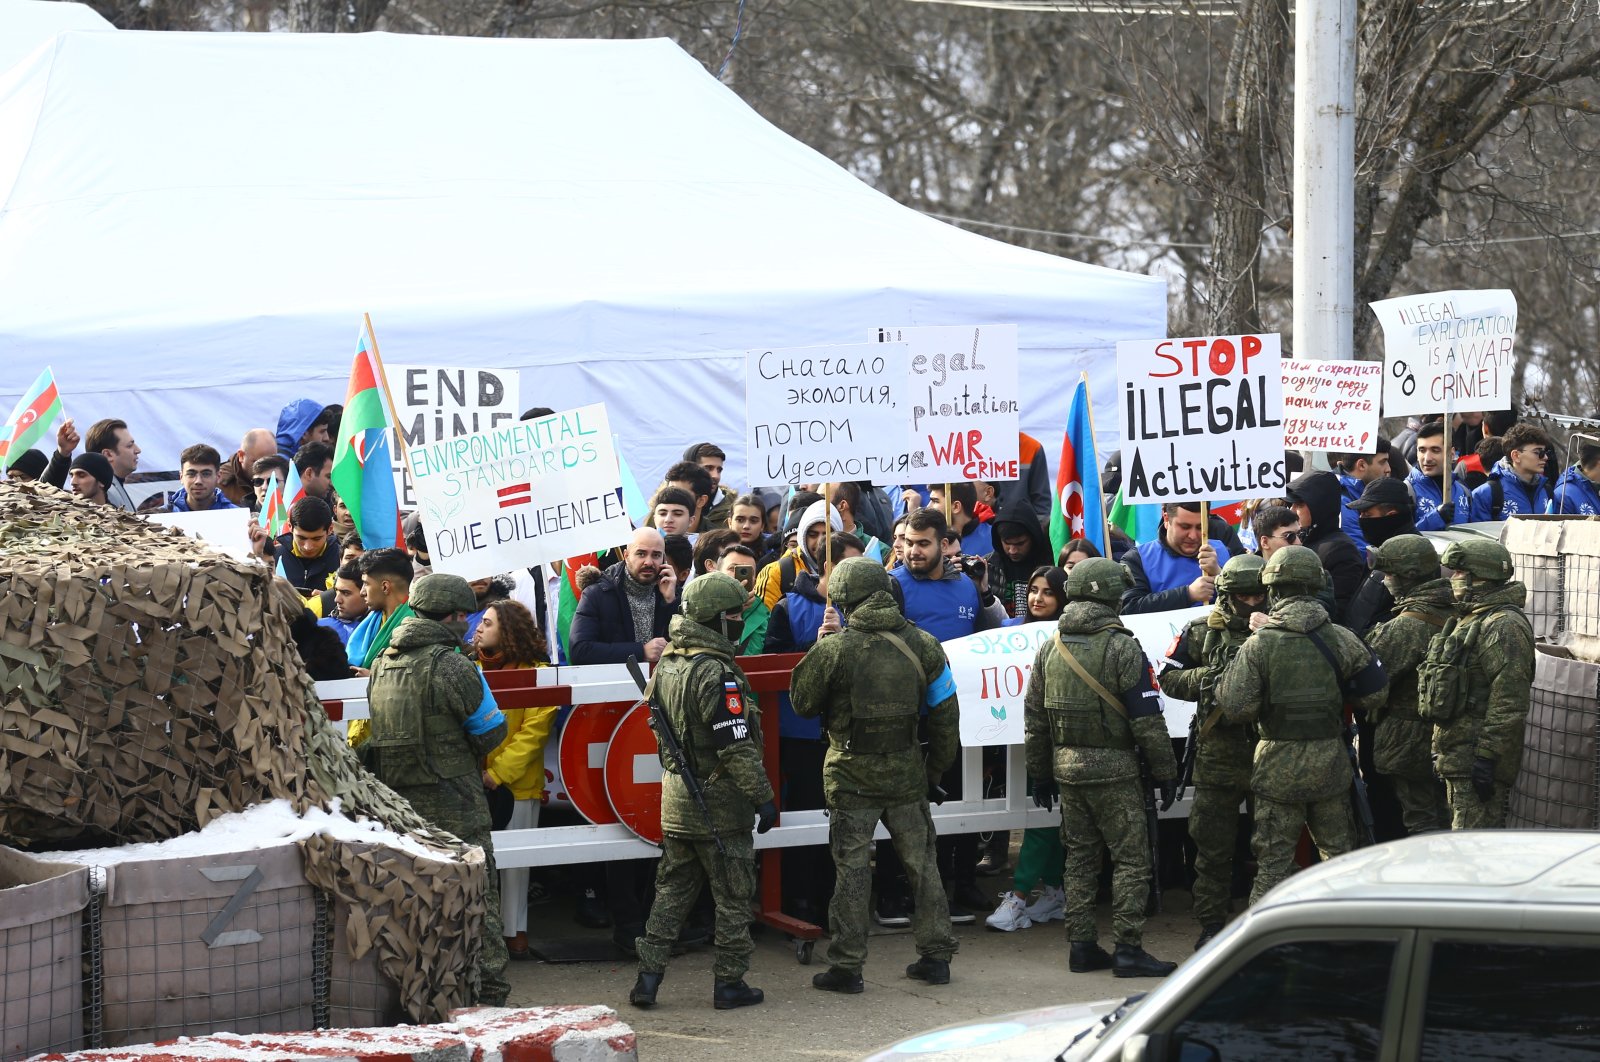 Azerbaijani ecologists and nongovernmental organizations protest the alleged &quot;illegal exploitation&quot; of mines in the Karabakh region where Armenians live and Russian peacekeepers are stationed, Azerbaijan, Dec. 13, 2022. (AA Photo)